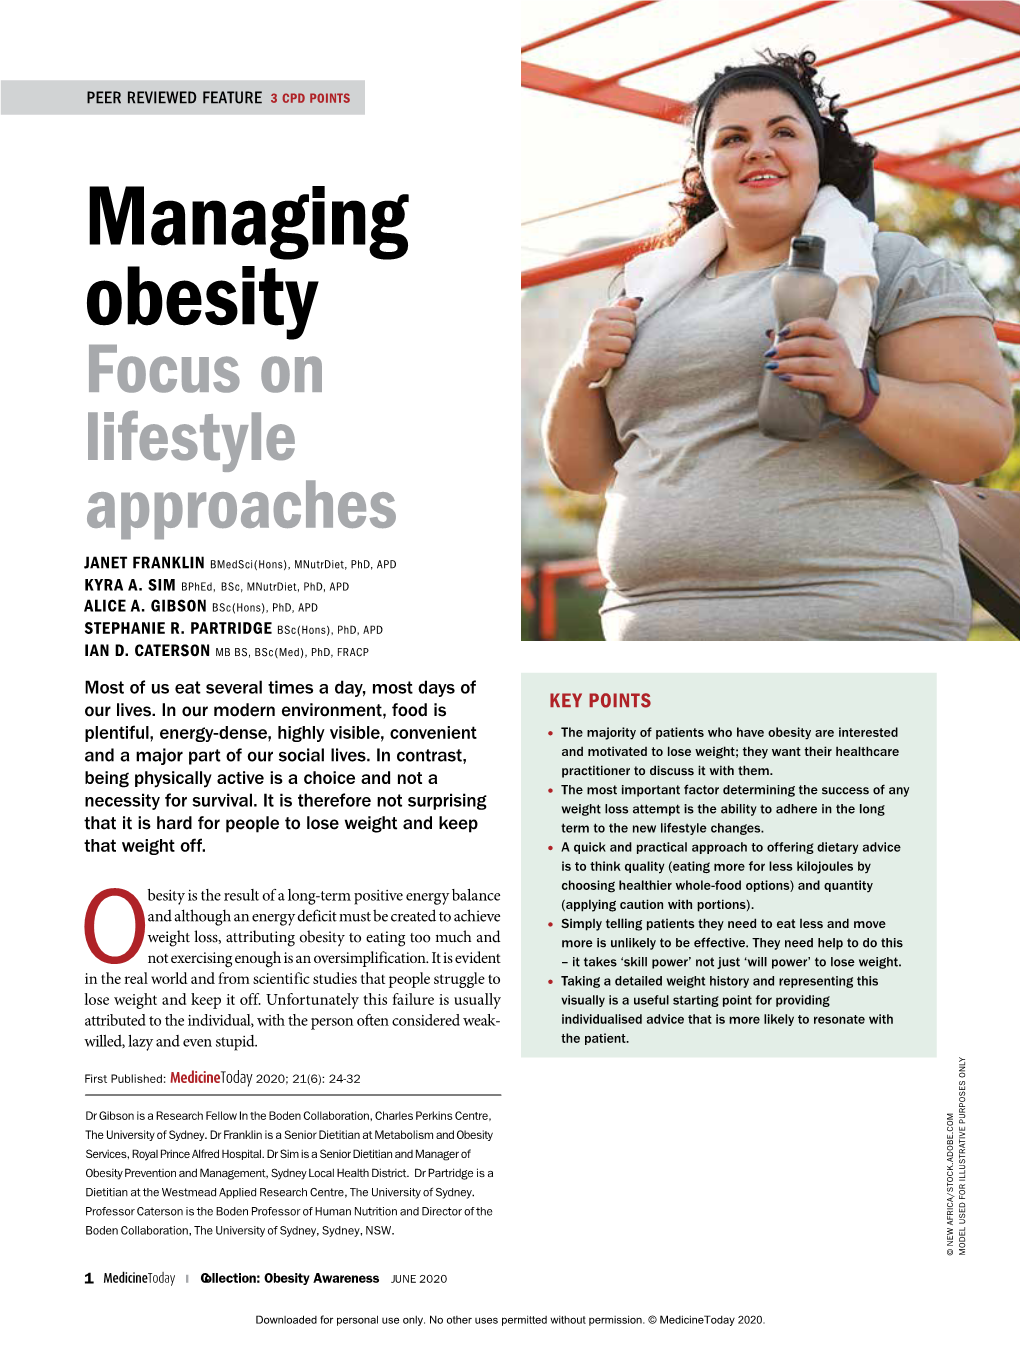 Managing Obesity Focus on Lifestyle Approaches